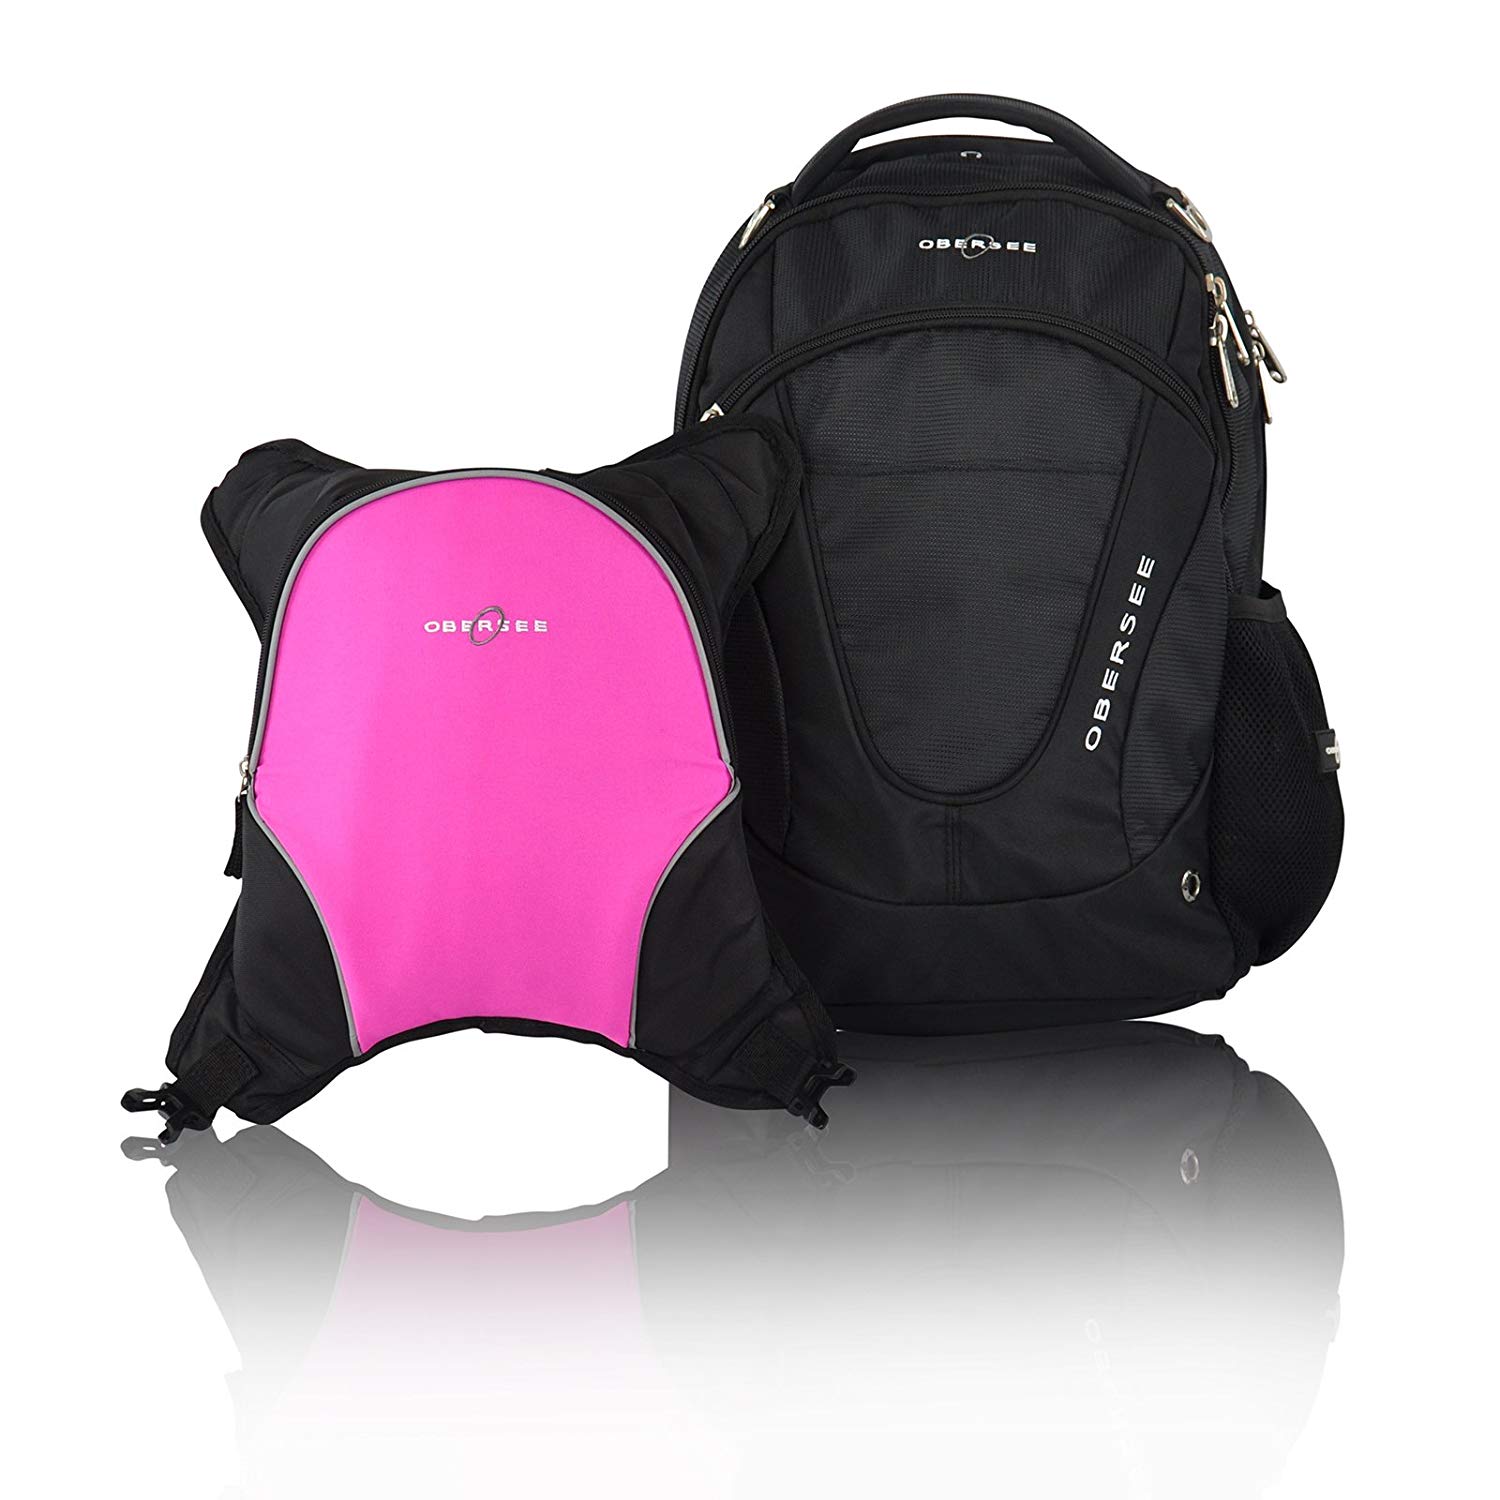 Obersee Oslo Nappy Backpack with Removable Cooling Device (Black/Pink)